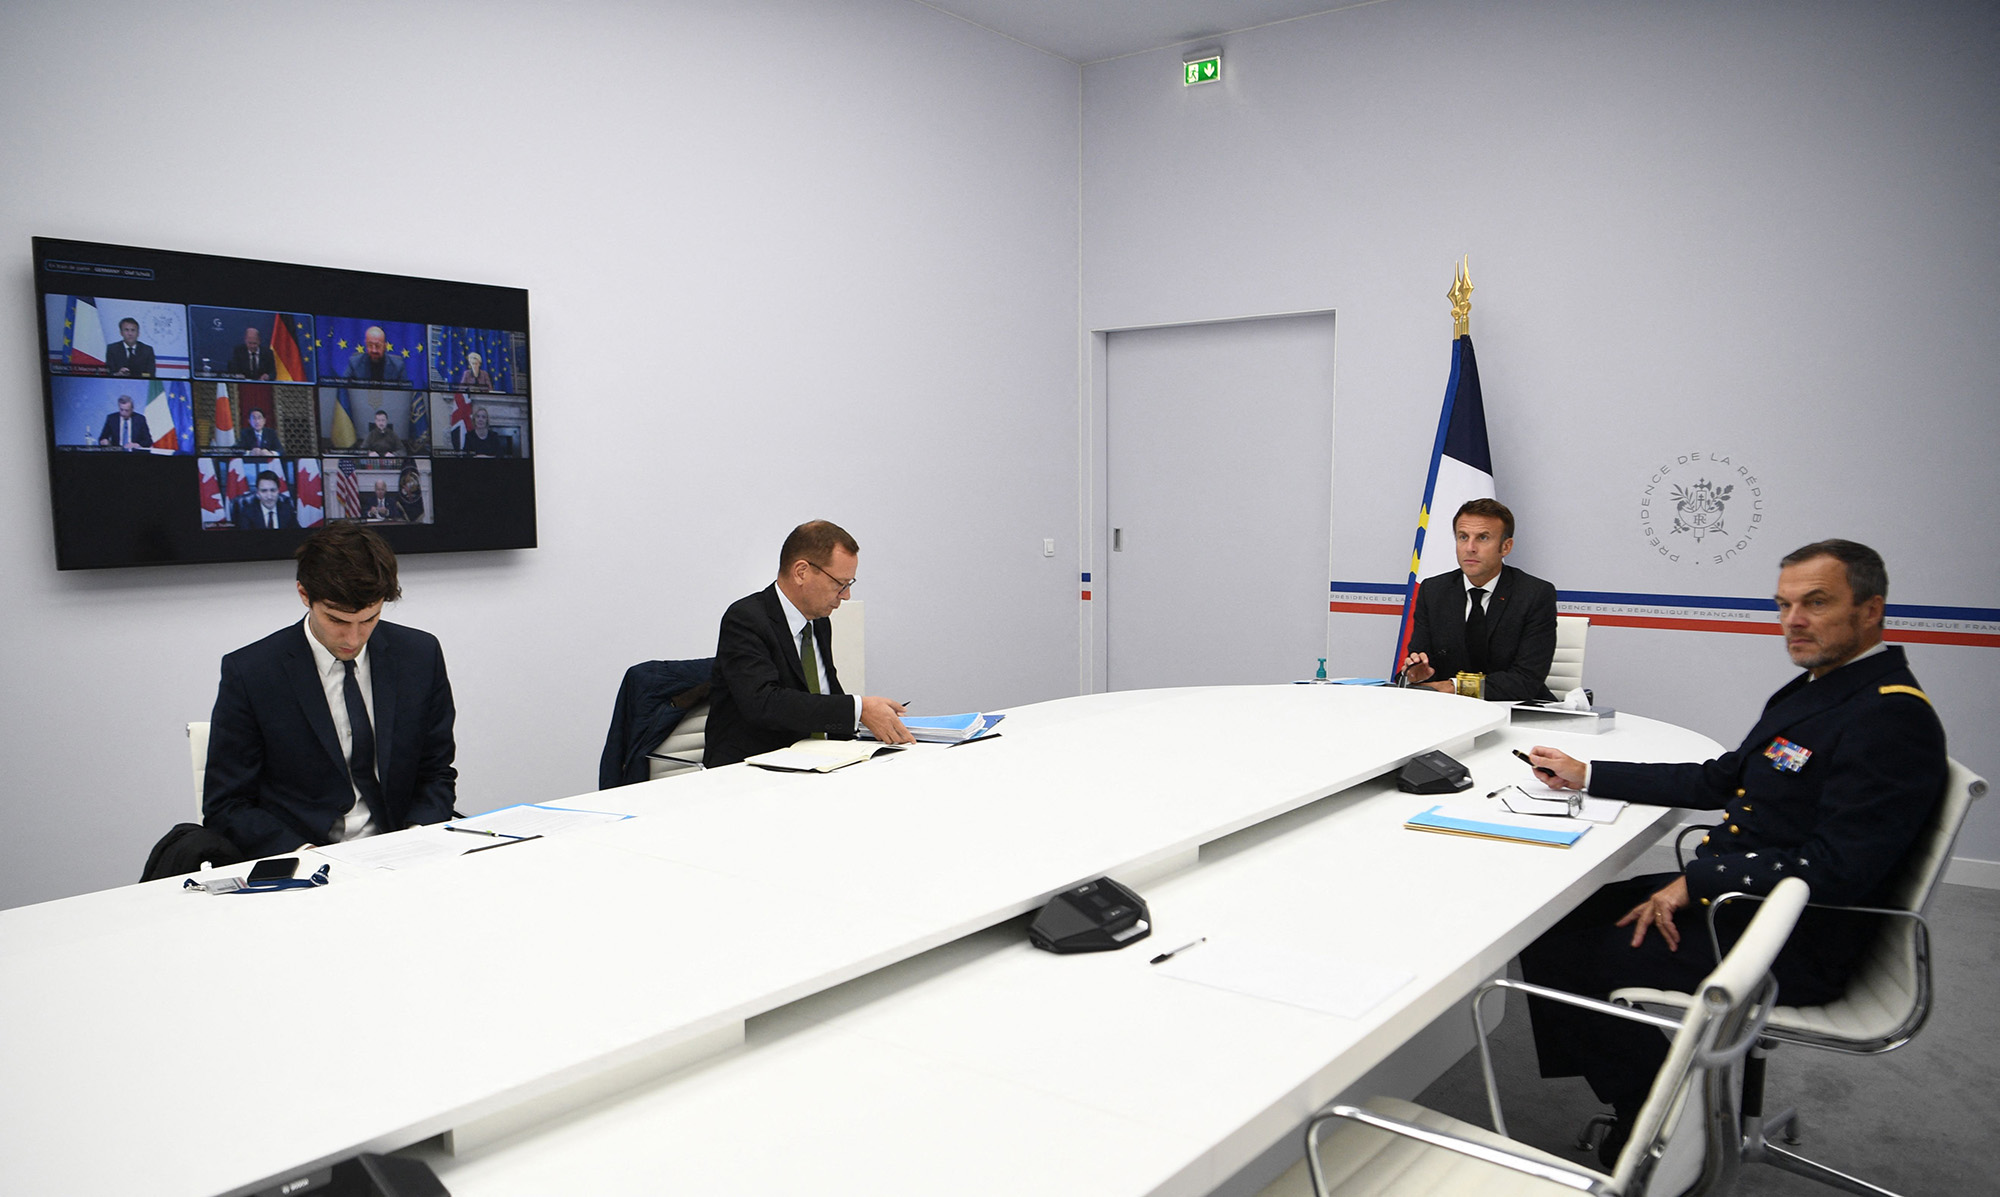 France's President Emmanuel Macron, second right, participates in a video conference with G7 leaders on the situation in Ukraine, at the Hotel Marigny in Paris, France, on October 11.